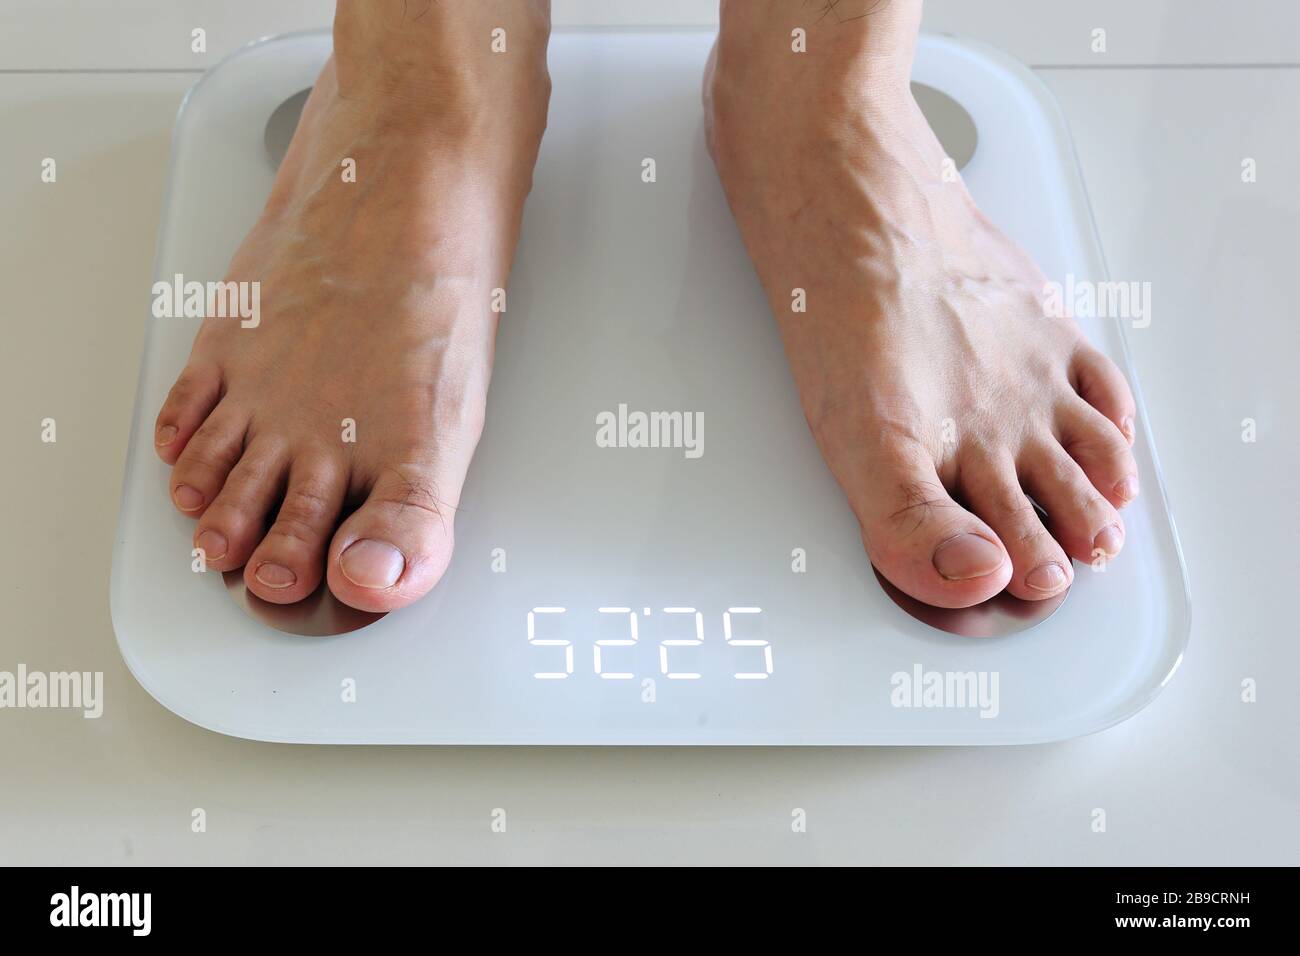 https://c8.alamy.com/comp/2B9CRNH/bare-feet-standing-on-a-scales-lose-weight-concept-with-person-on-a-scale-measuring-kilograms-weight-scale-underweight-man-on-scale-2B9CRNH.jpg